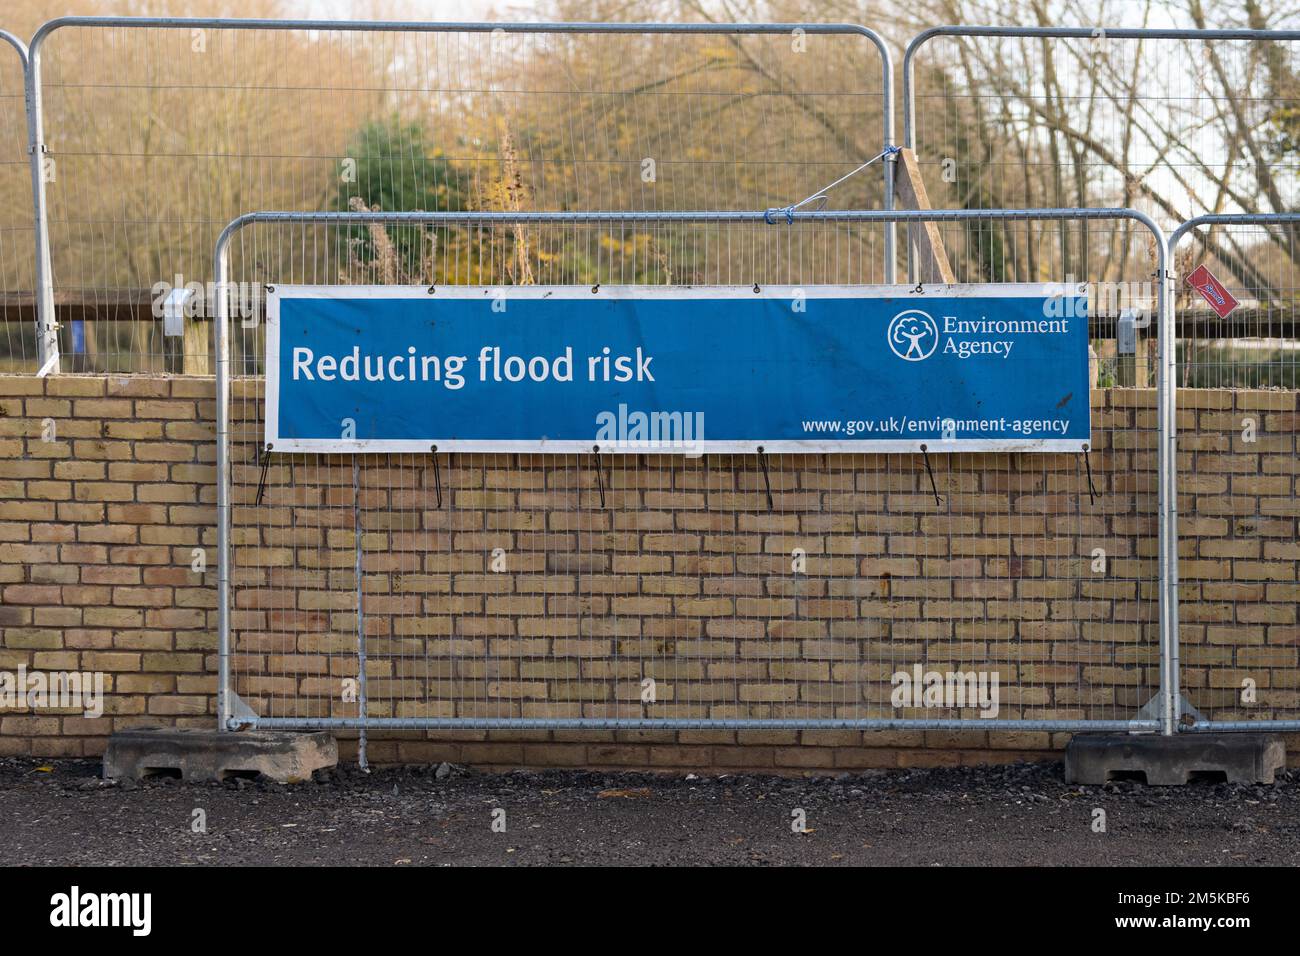 Environment Agency Reducing flood risk banner in front of flood defence wall under construction, Boat Inn, Sprotbrough, Doncaster, England, UK Stock Photo